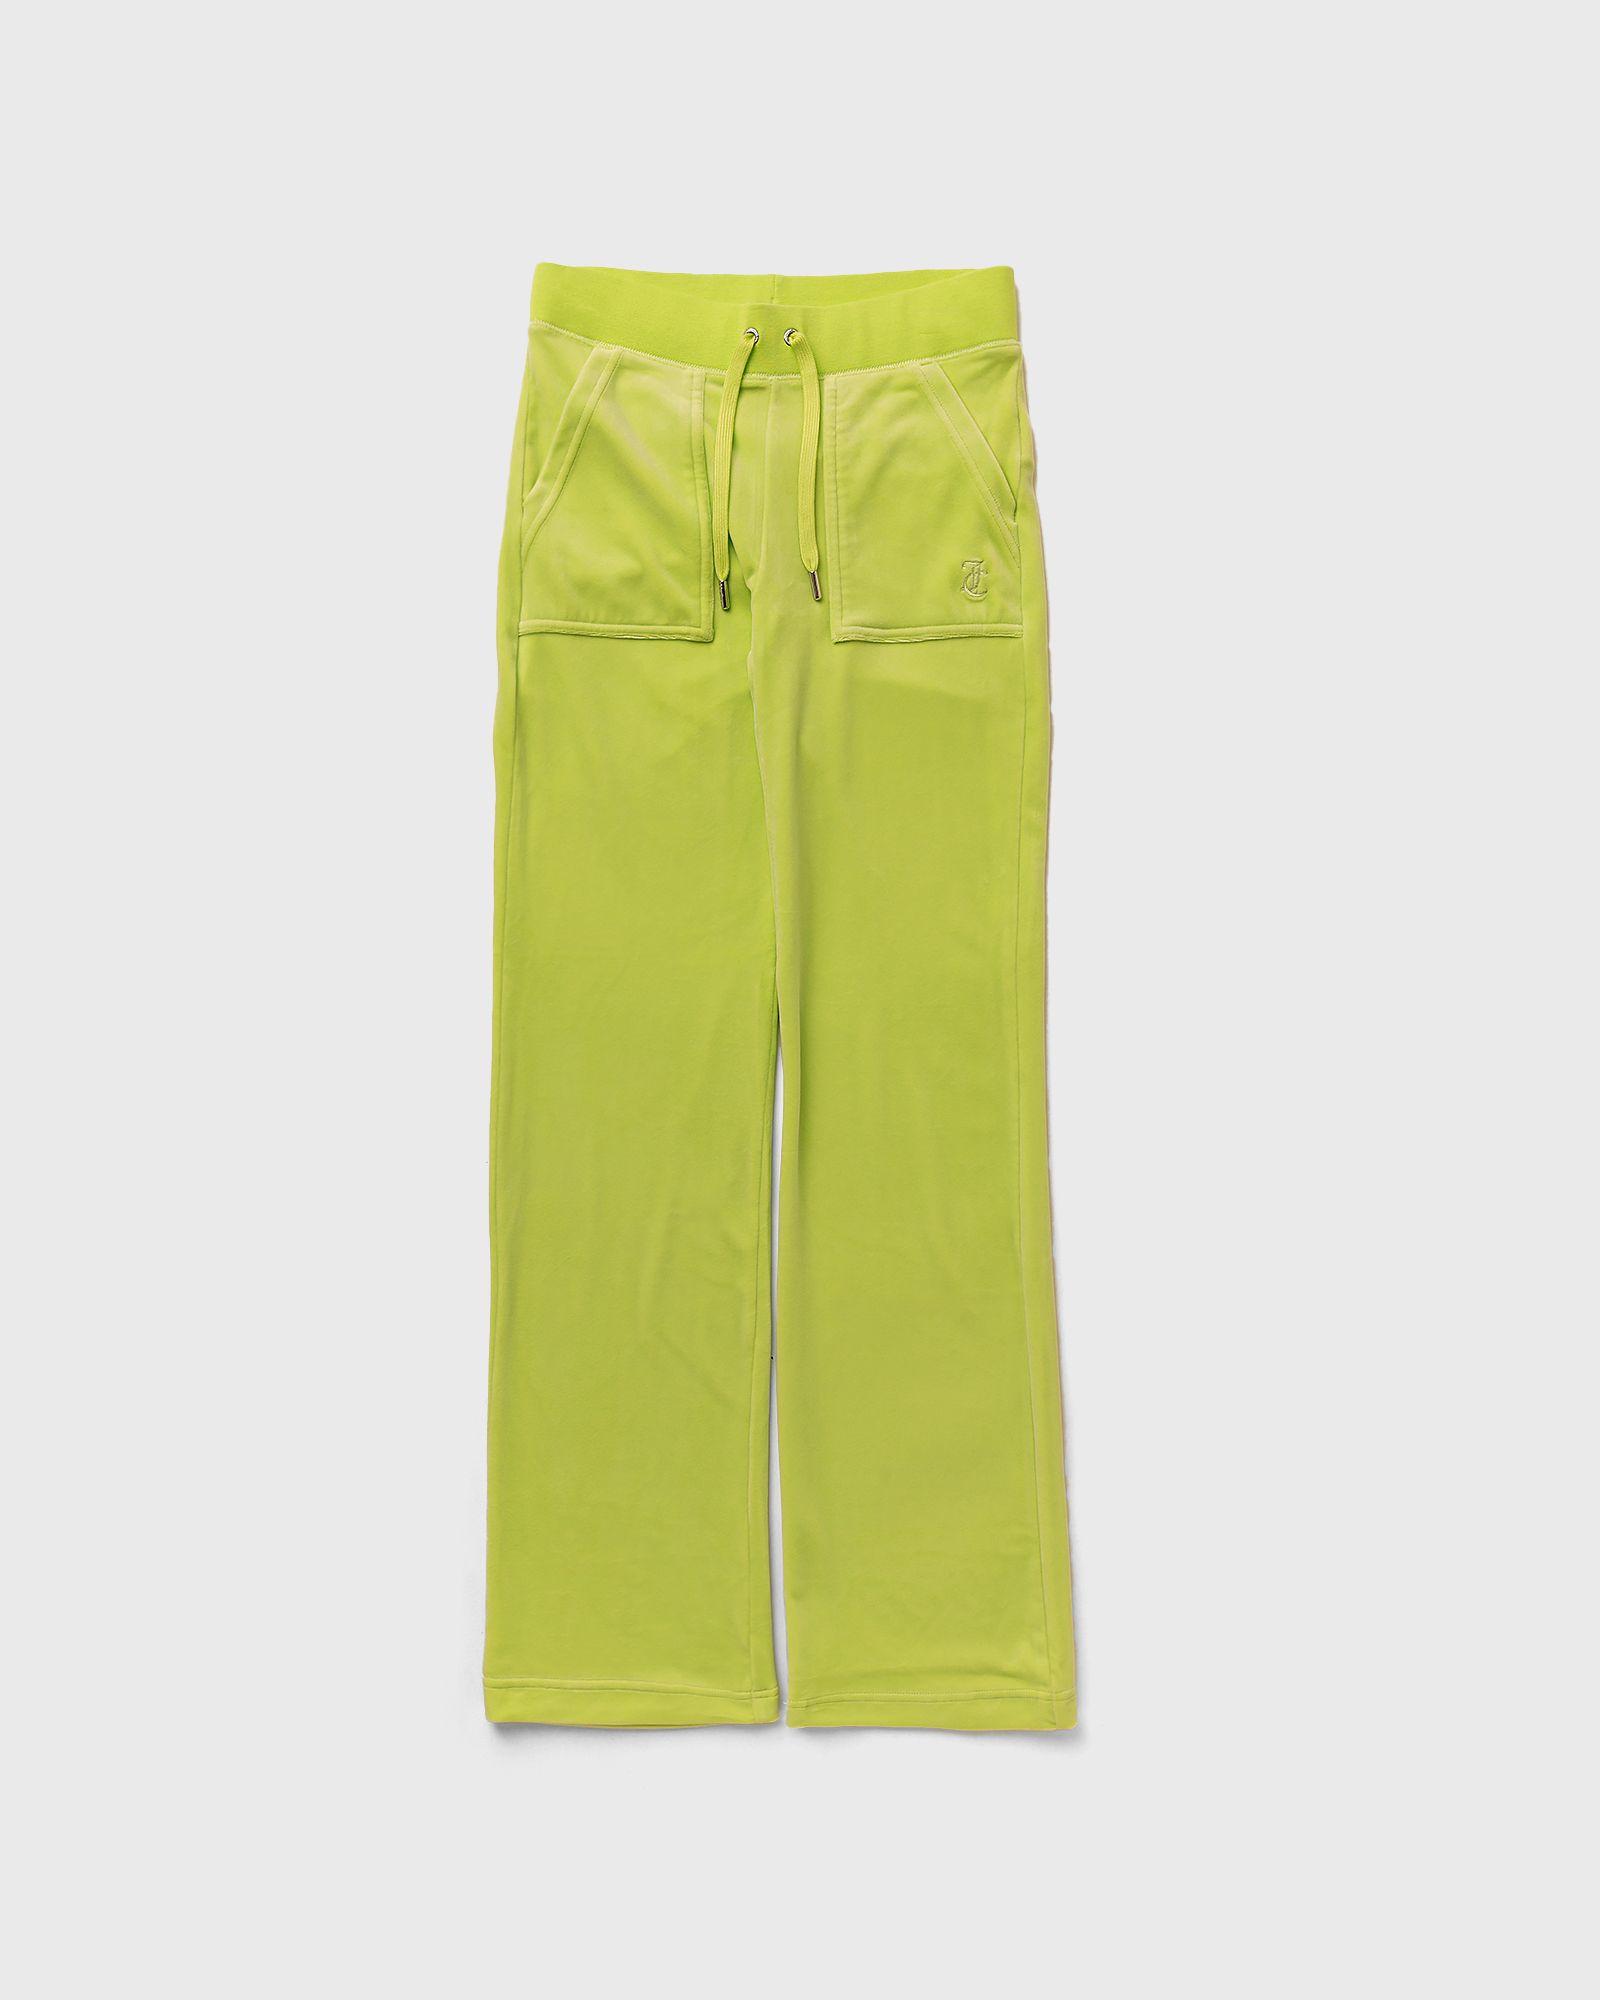 Juicy Couture - wmns classic velour del ray pant women sweatpants green in größe:l